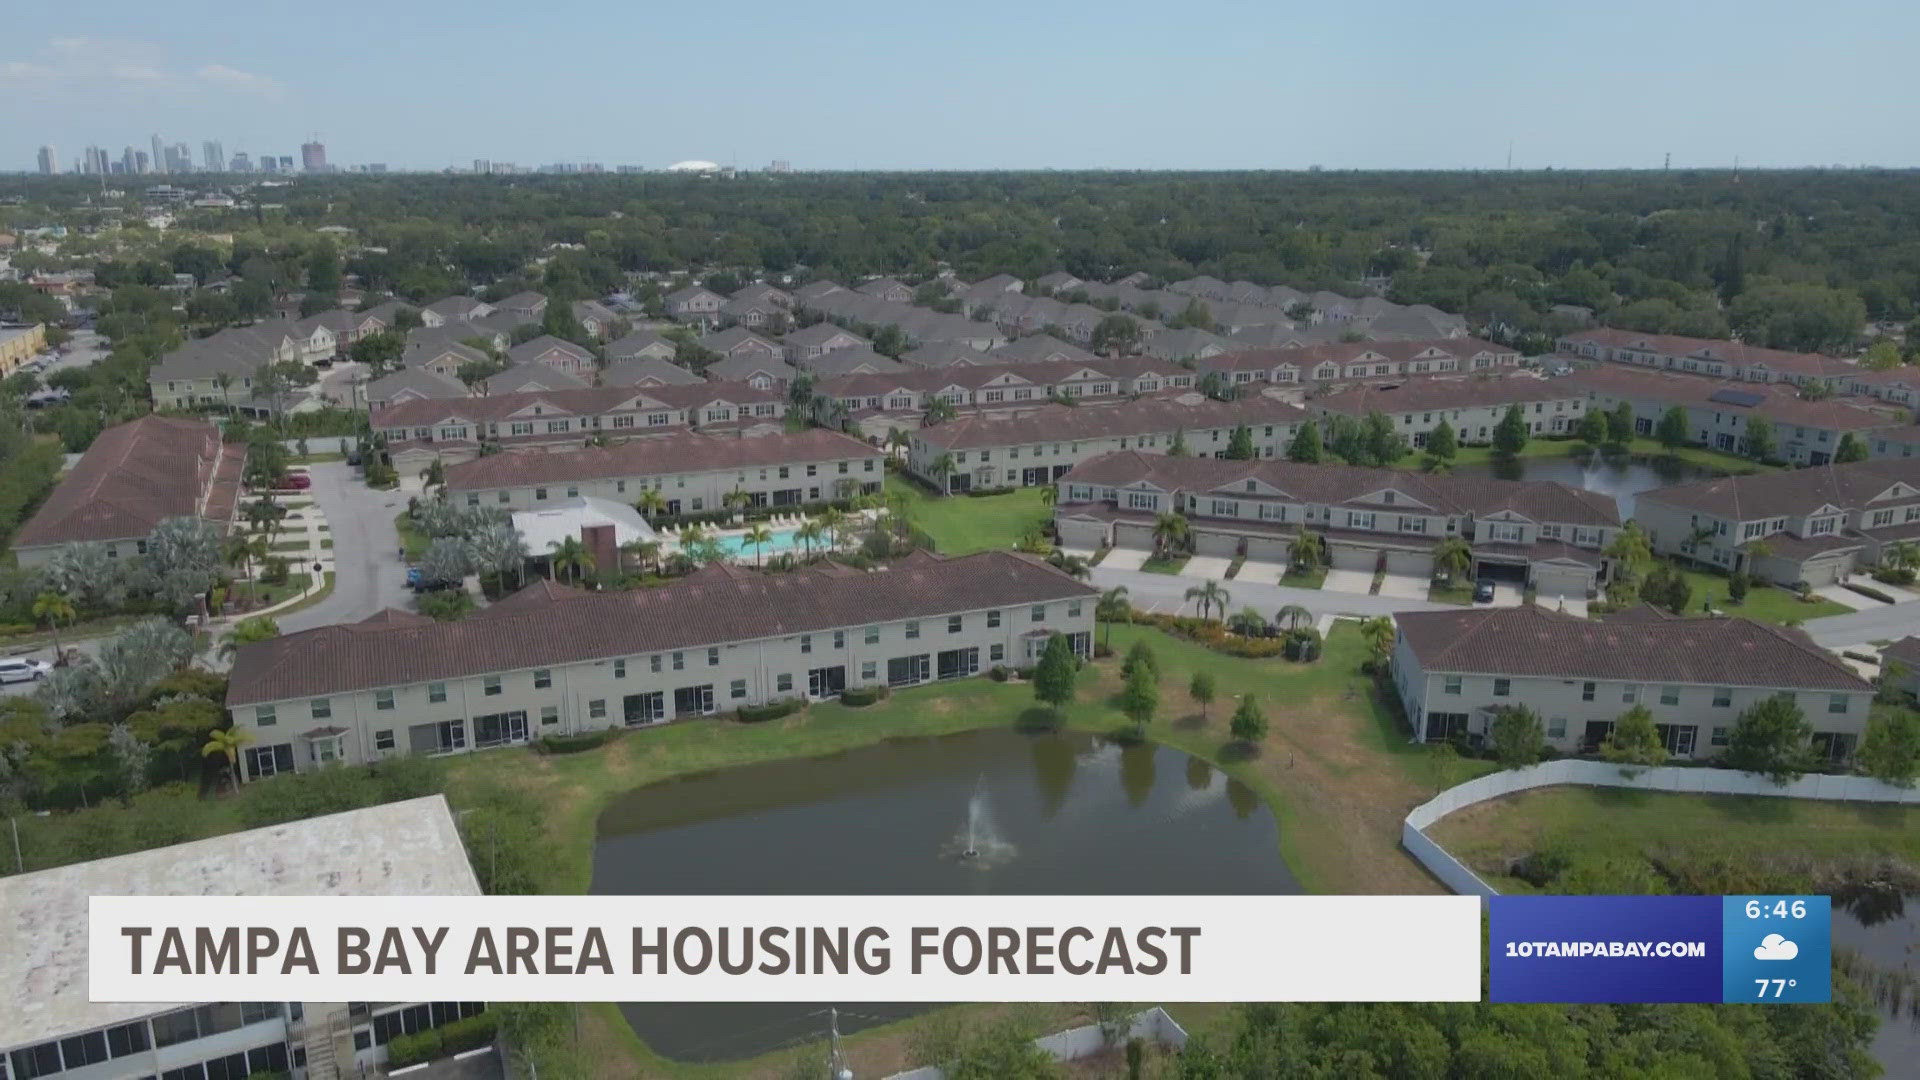 Florida's Housing Crisis: Affordability Expected to Plummet by 2030